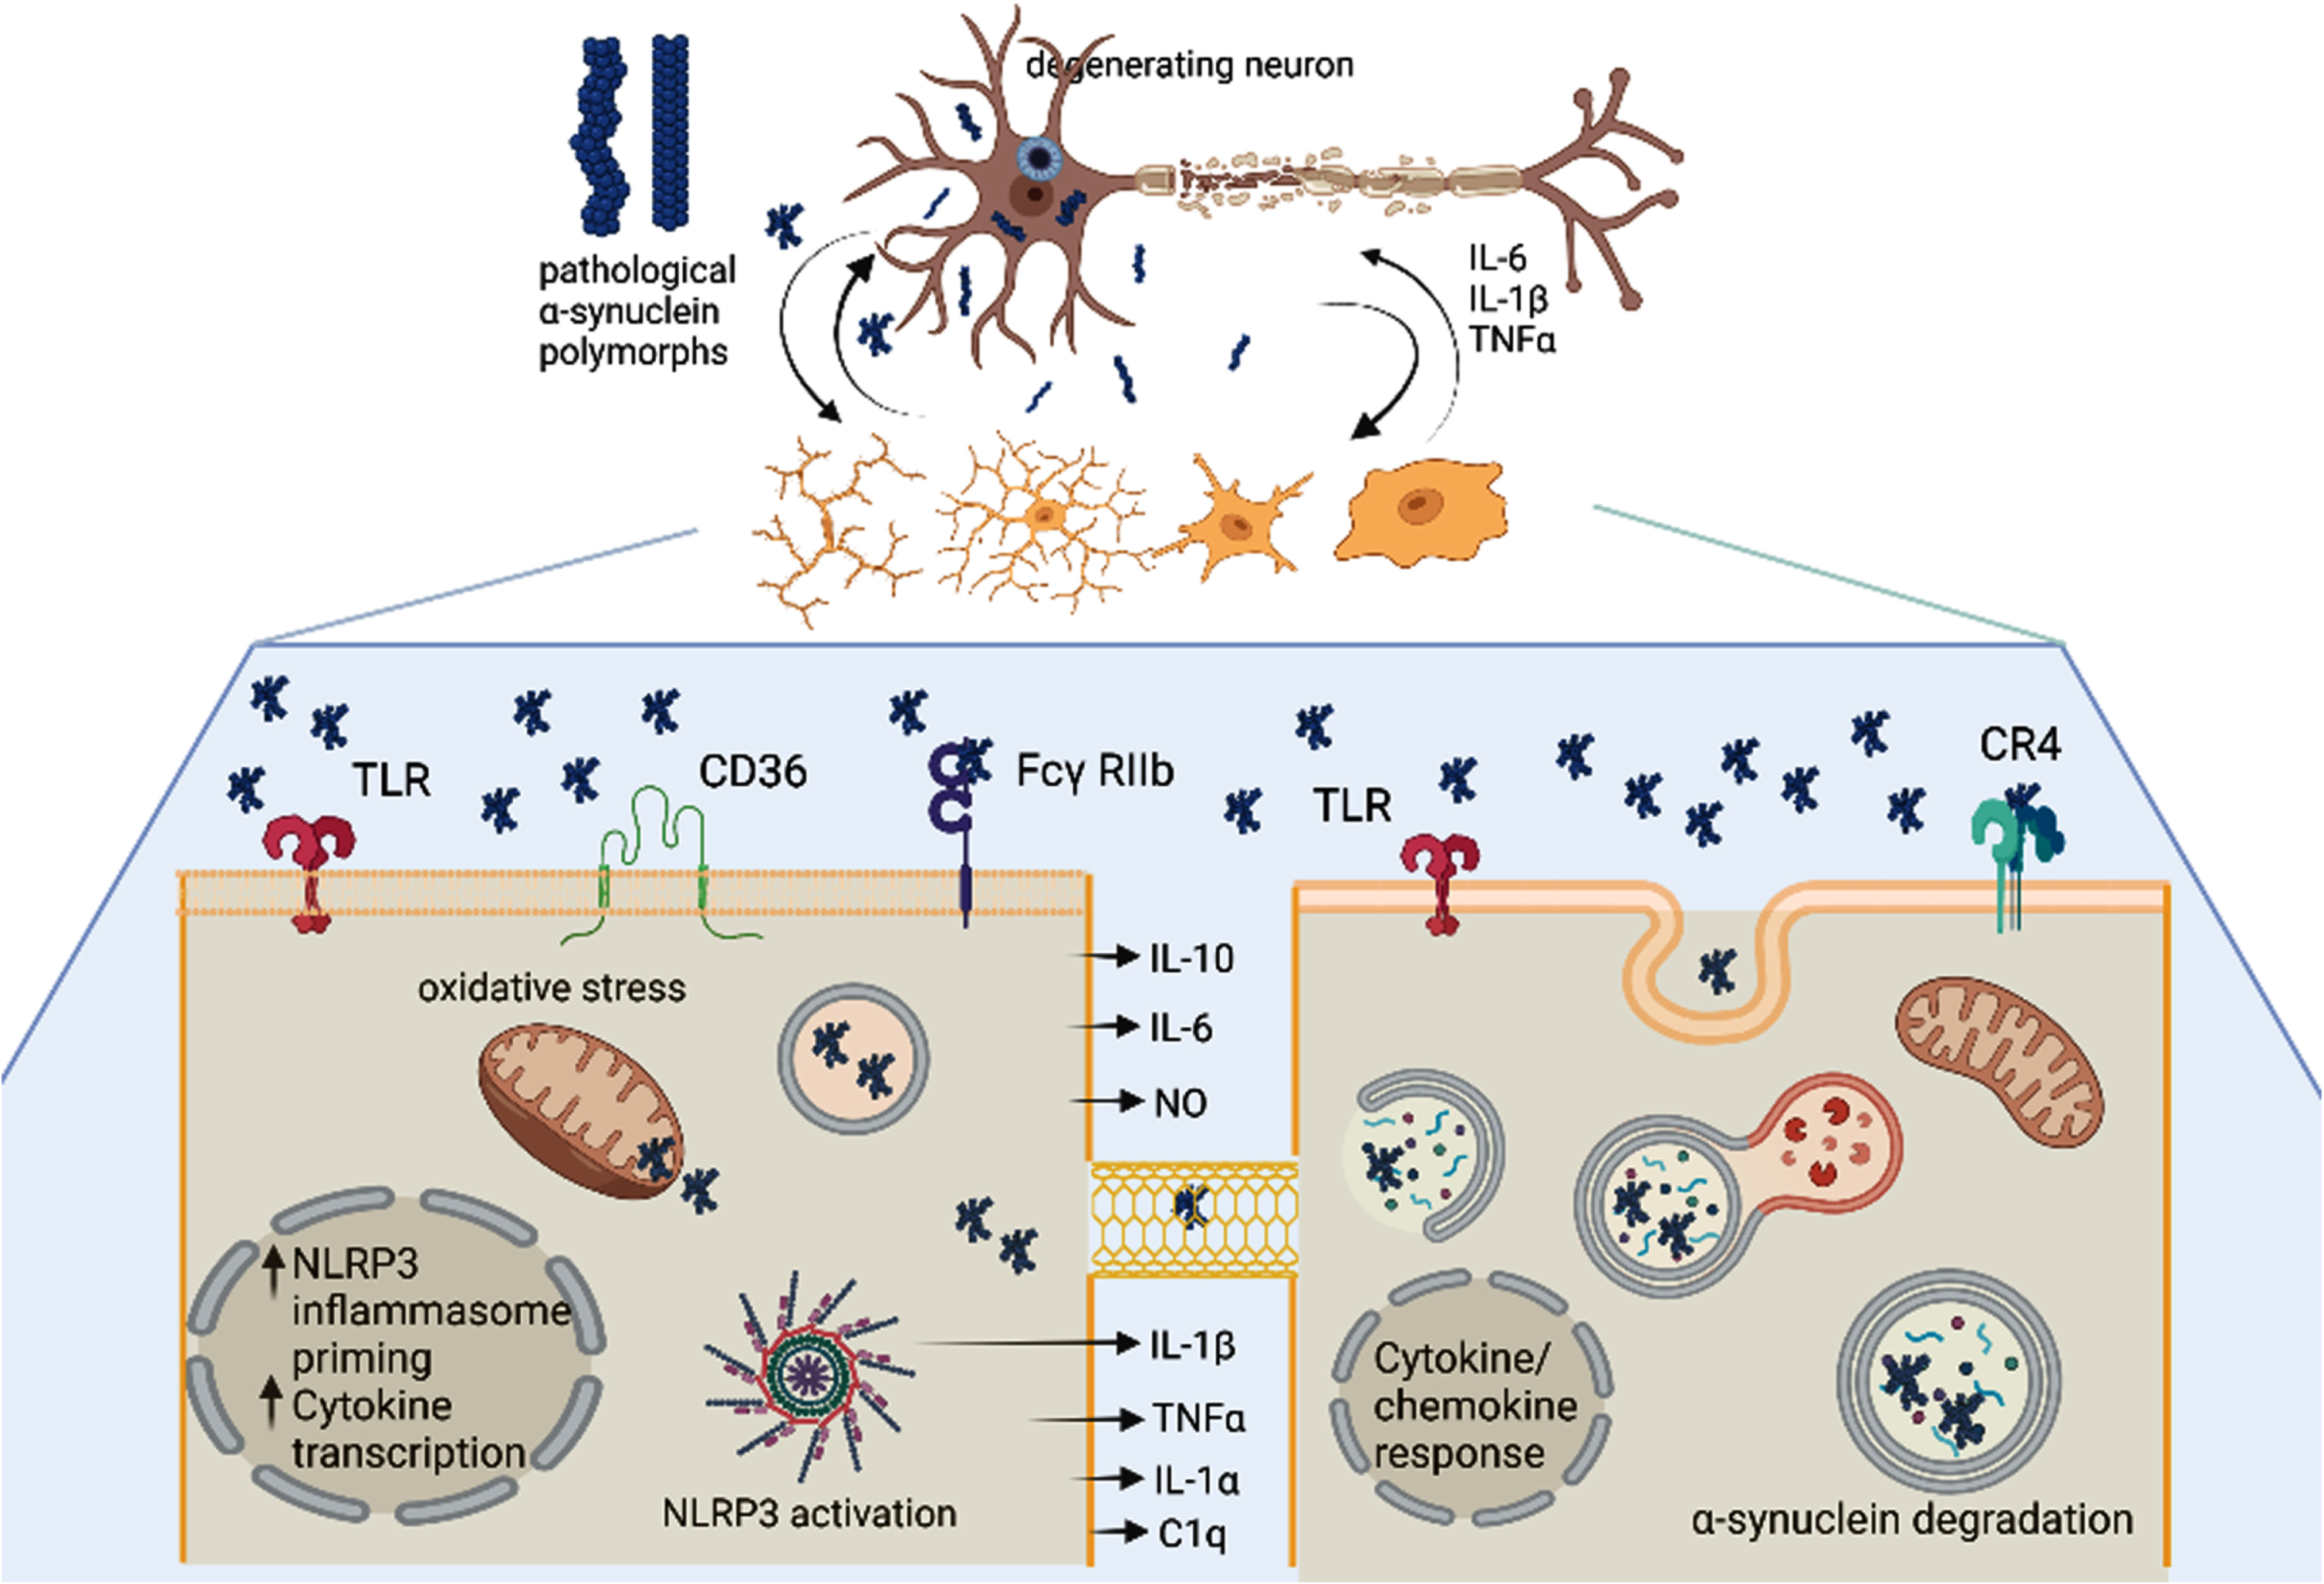 The unresolved heterogeneity of microglia and DAMs in Parkinson’s disease. α-synuclein (α-syn) oligomers as well as pro-inflammatory signals released from the degenerating neuron may trigger activation of microglia in a disease-specific mode (DAMs). Importantly different α-syn polymorphs may induce different microglial responses. Microglia may get different morphological patterns of activation as well as execute different functions: i) the left lower panel shows pro-inflammatory signaling in microglia triggered by α-syn oligomers involving different membrane receptors, NLRP3 inflammasome activation, mitochondrial and oxidative stress, as well as release of toxic pro-inflammatory cytokines; ii). The right lower panel demonstrates a microglial cell which is involved in the uptake and clearance of α-syn either from the extracellular space or through putative nanotubes within the microglial network. Created with BioRender.com.